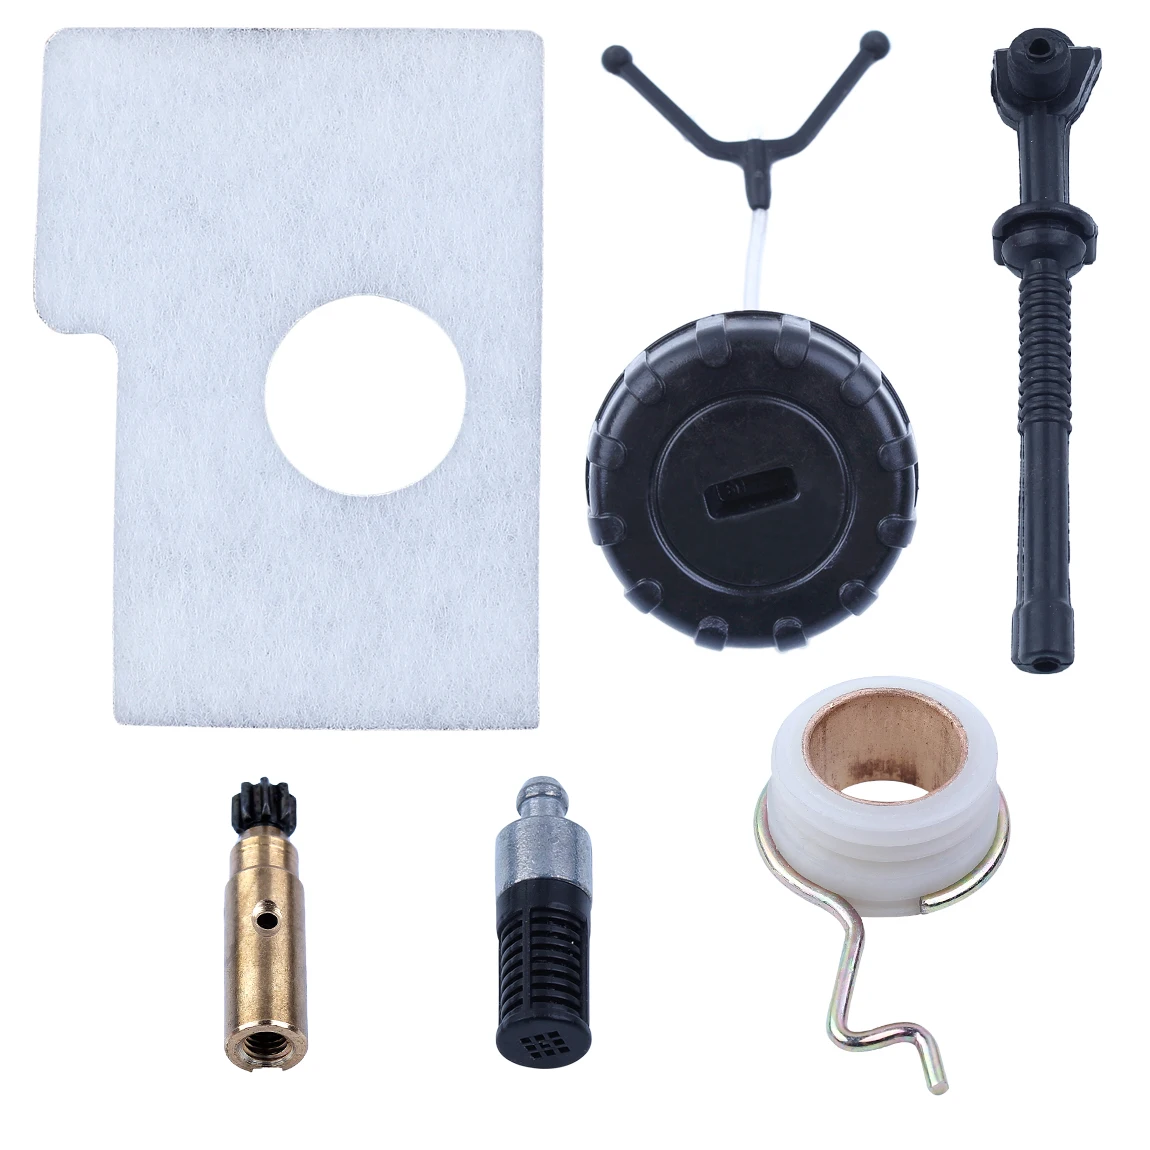 Oil Pump Worm Gear Air Filter Tube Line Hose Gas Tank Cap Kit For STIHL MS180 MS170 018 017 MS 170 180 Chainsaw 1123 640 7102